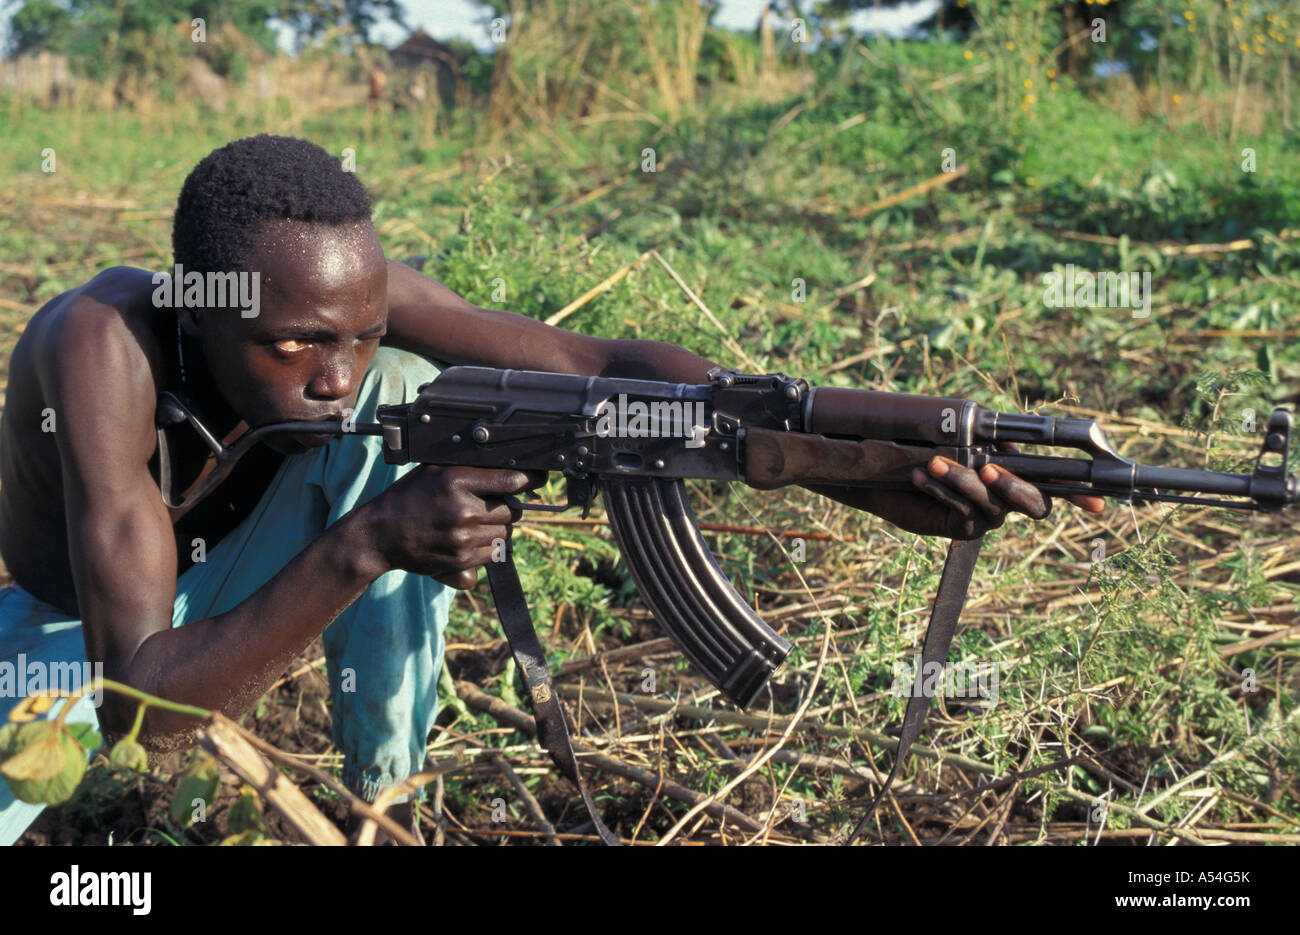 Painet hq1423 south sudan spla soldier chukudum ak47 army christian conflict images war country developing nation less Stock Photo